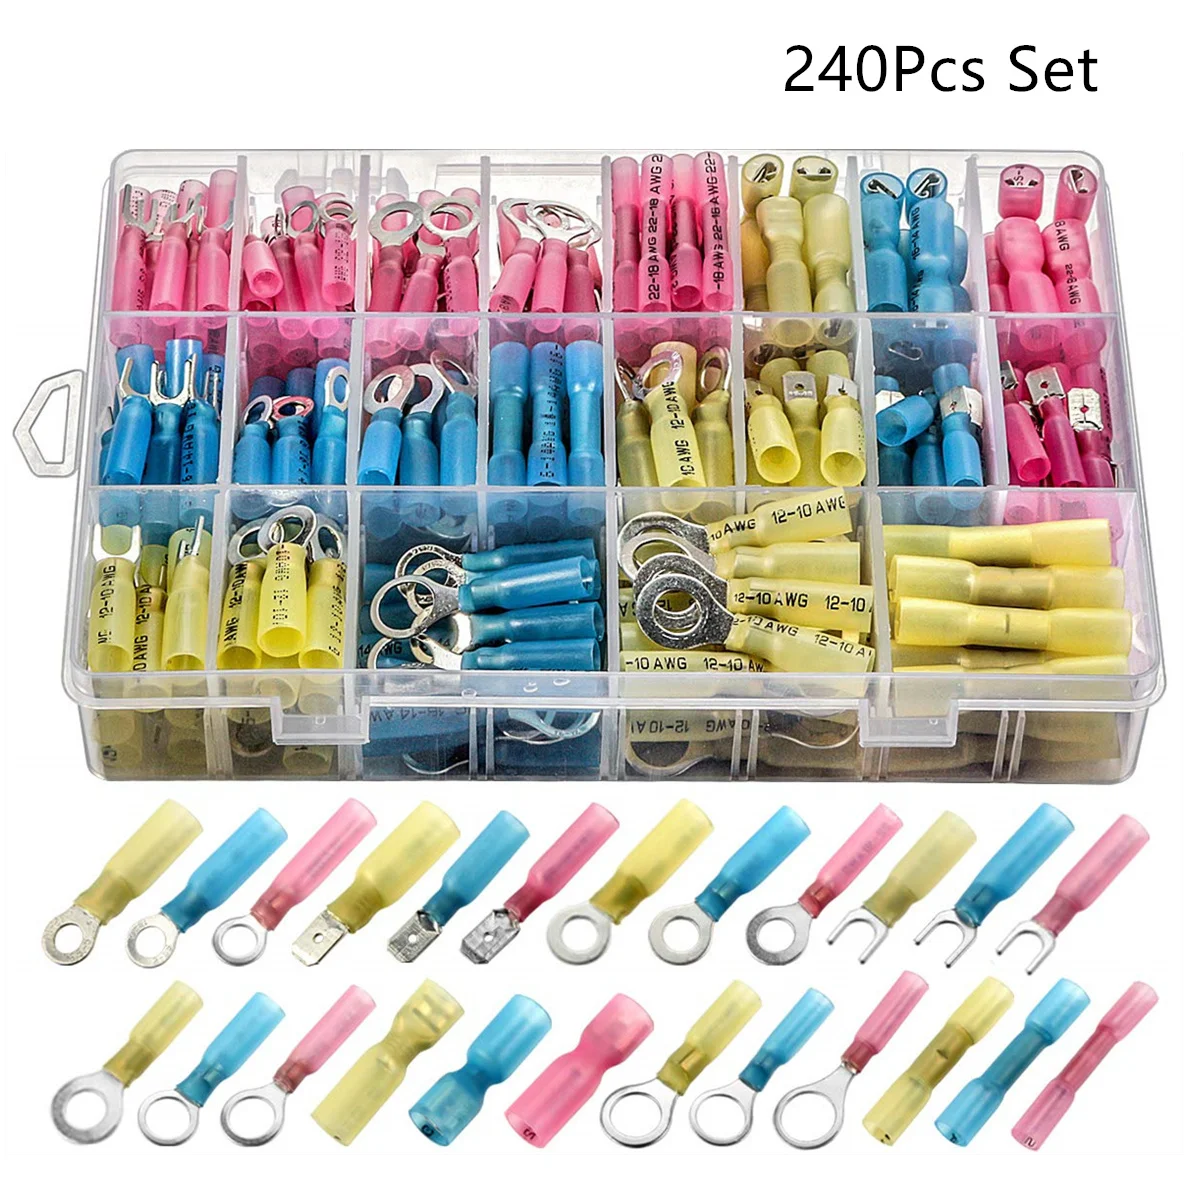 

240PCS Assorted Ring Butt Spade Heat Shrink Wire Connectors Waterproof Marine Automotive Electrical Insulated Crimp Terminals